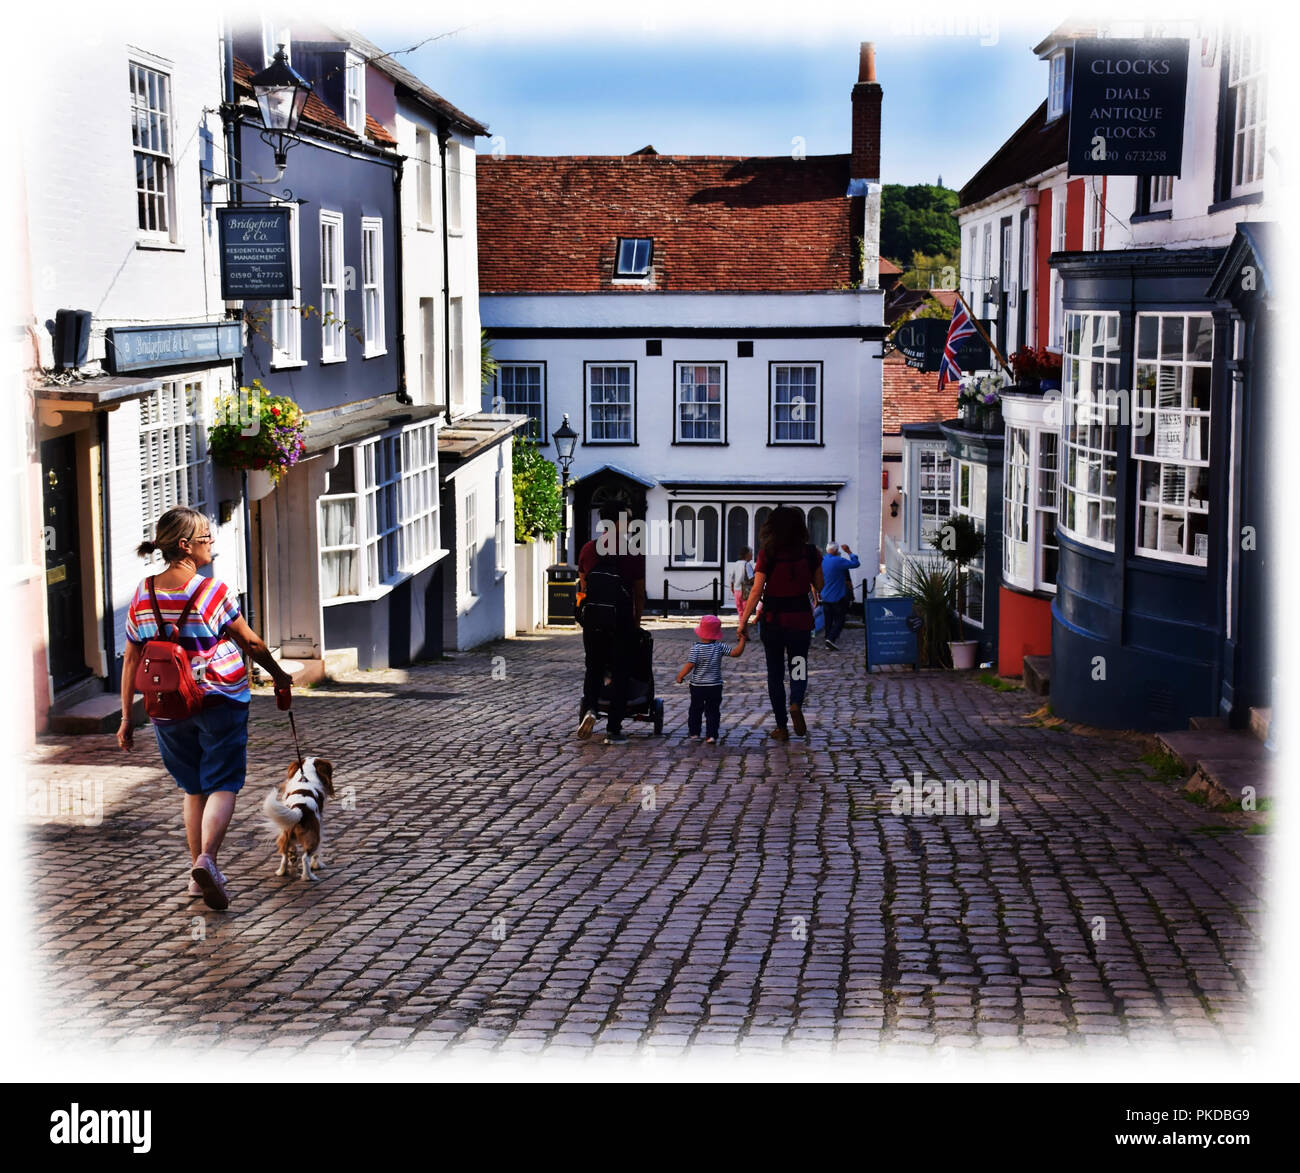 A cobbled street in the sailing town of Lymington, leads down to the busy quayside where people can fish, sail, catch the ferry or just chill. Stock Photo